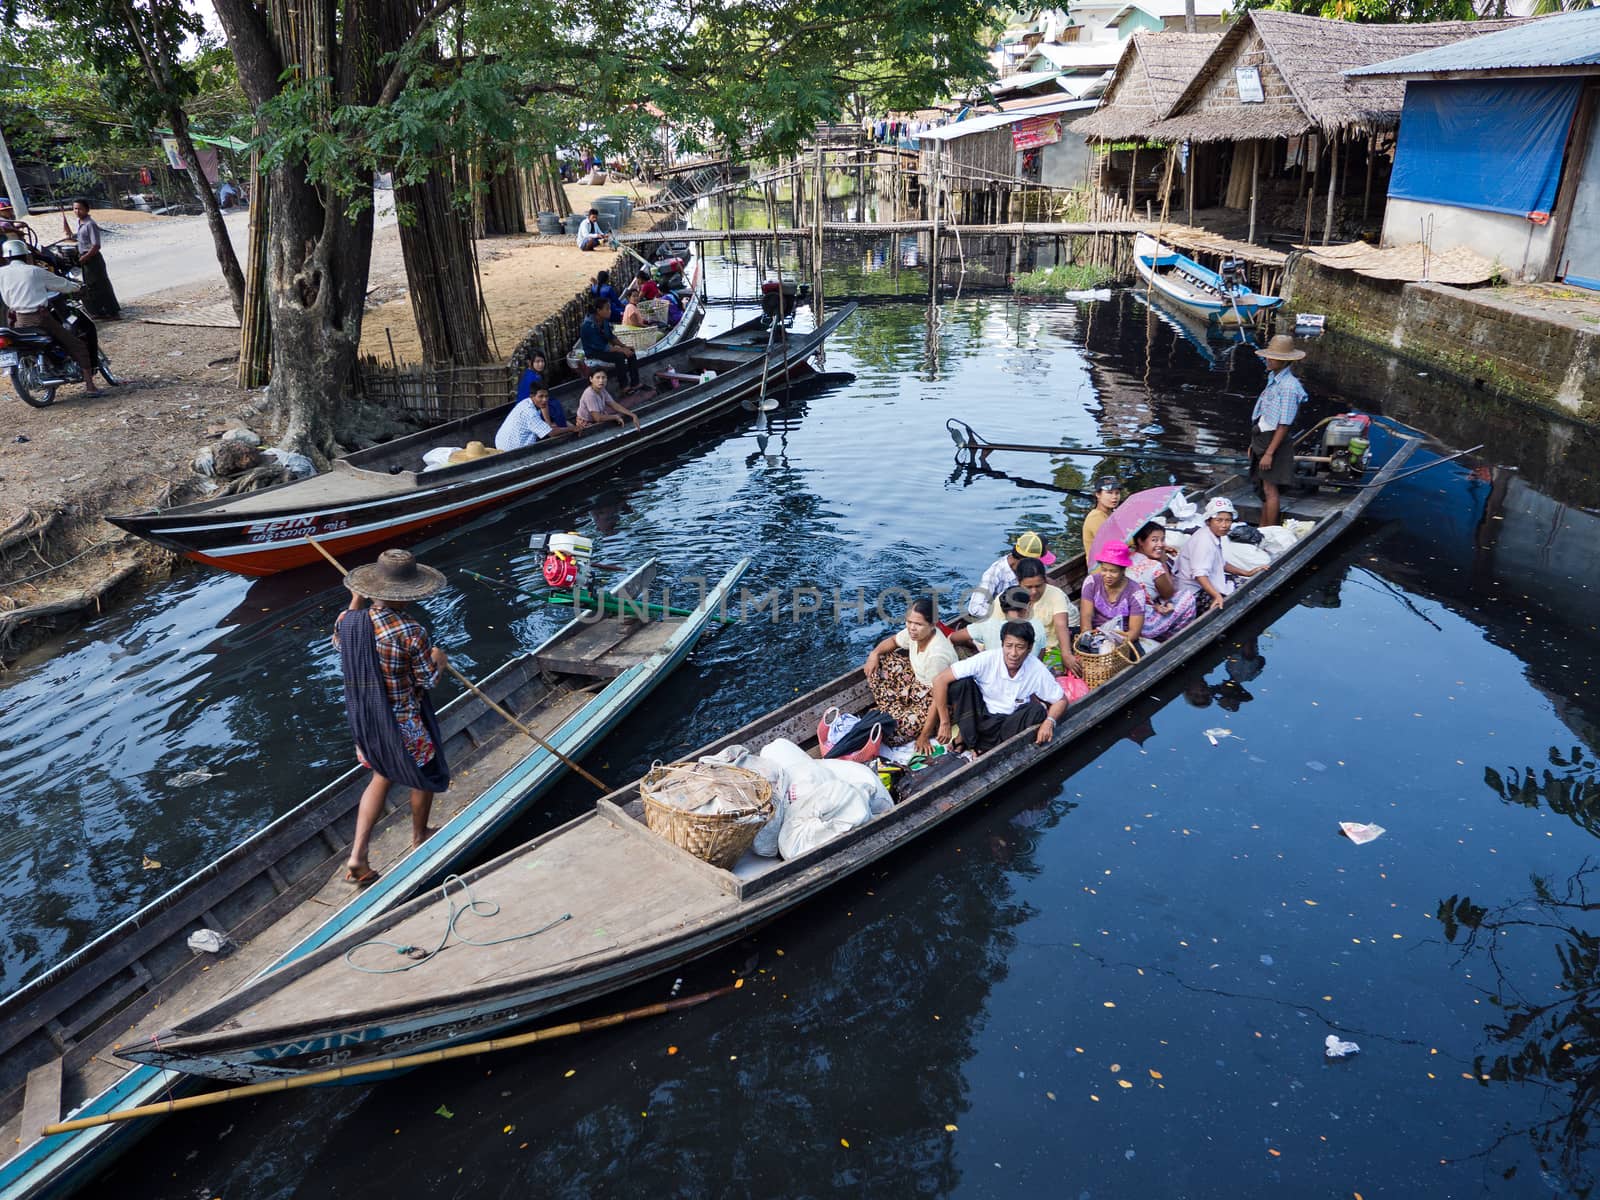 MAUBIN, MYANMAR - NOVEMBER 12, 2014: Passengers on a canal ferry ready to leave Maubin, Ayeyarwady Division in Southwest Myanmar. Many homes in the area lack road connection and can only be reached by boat.